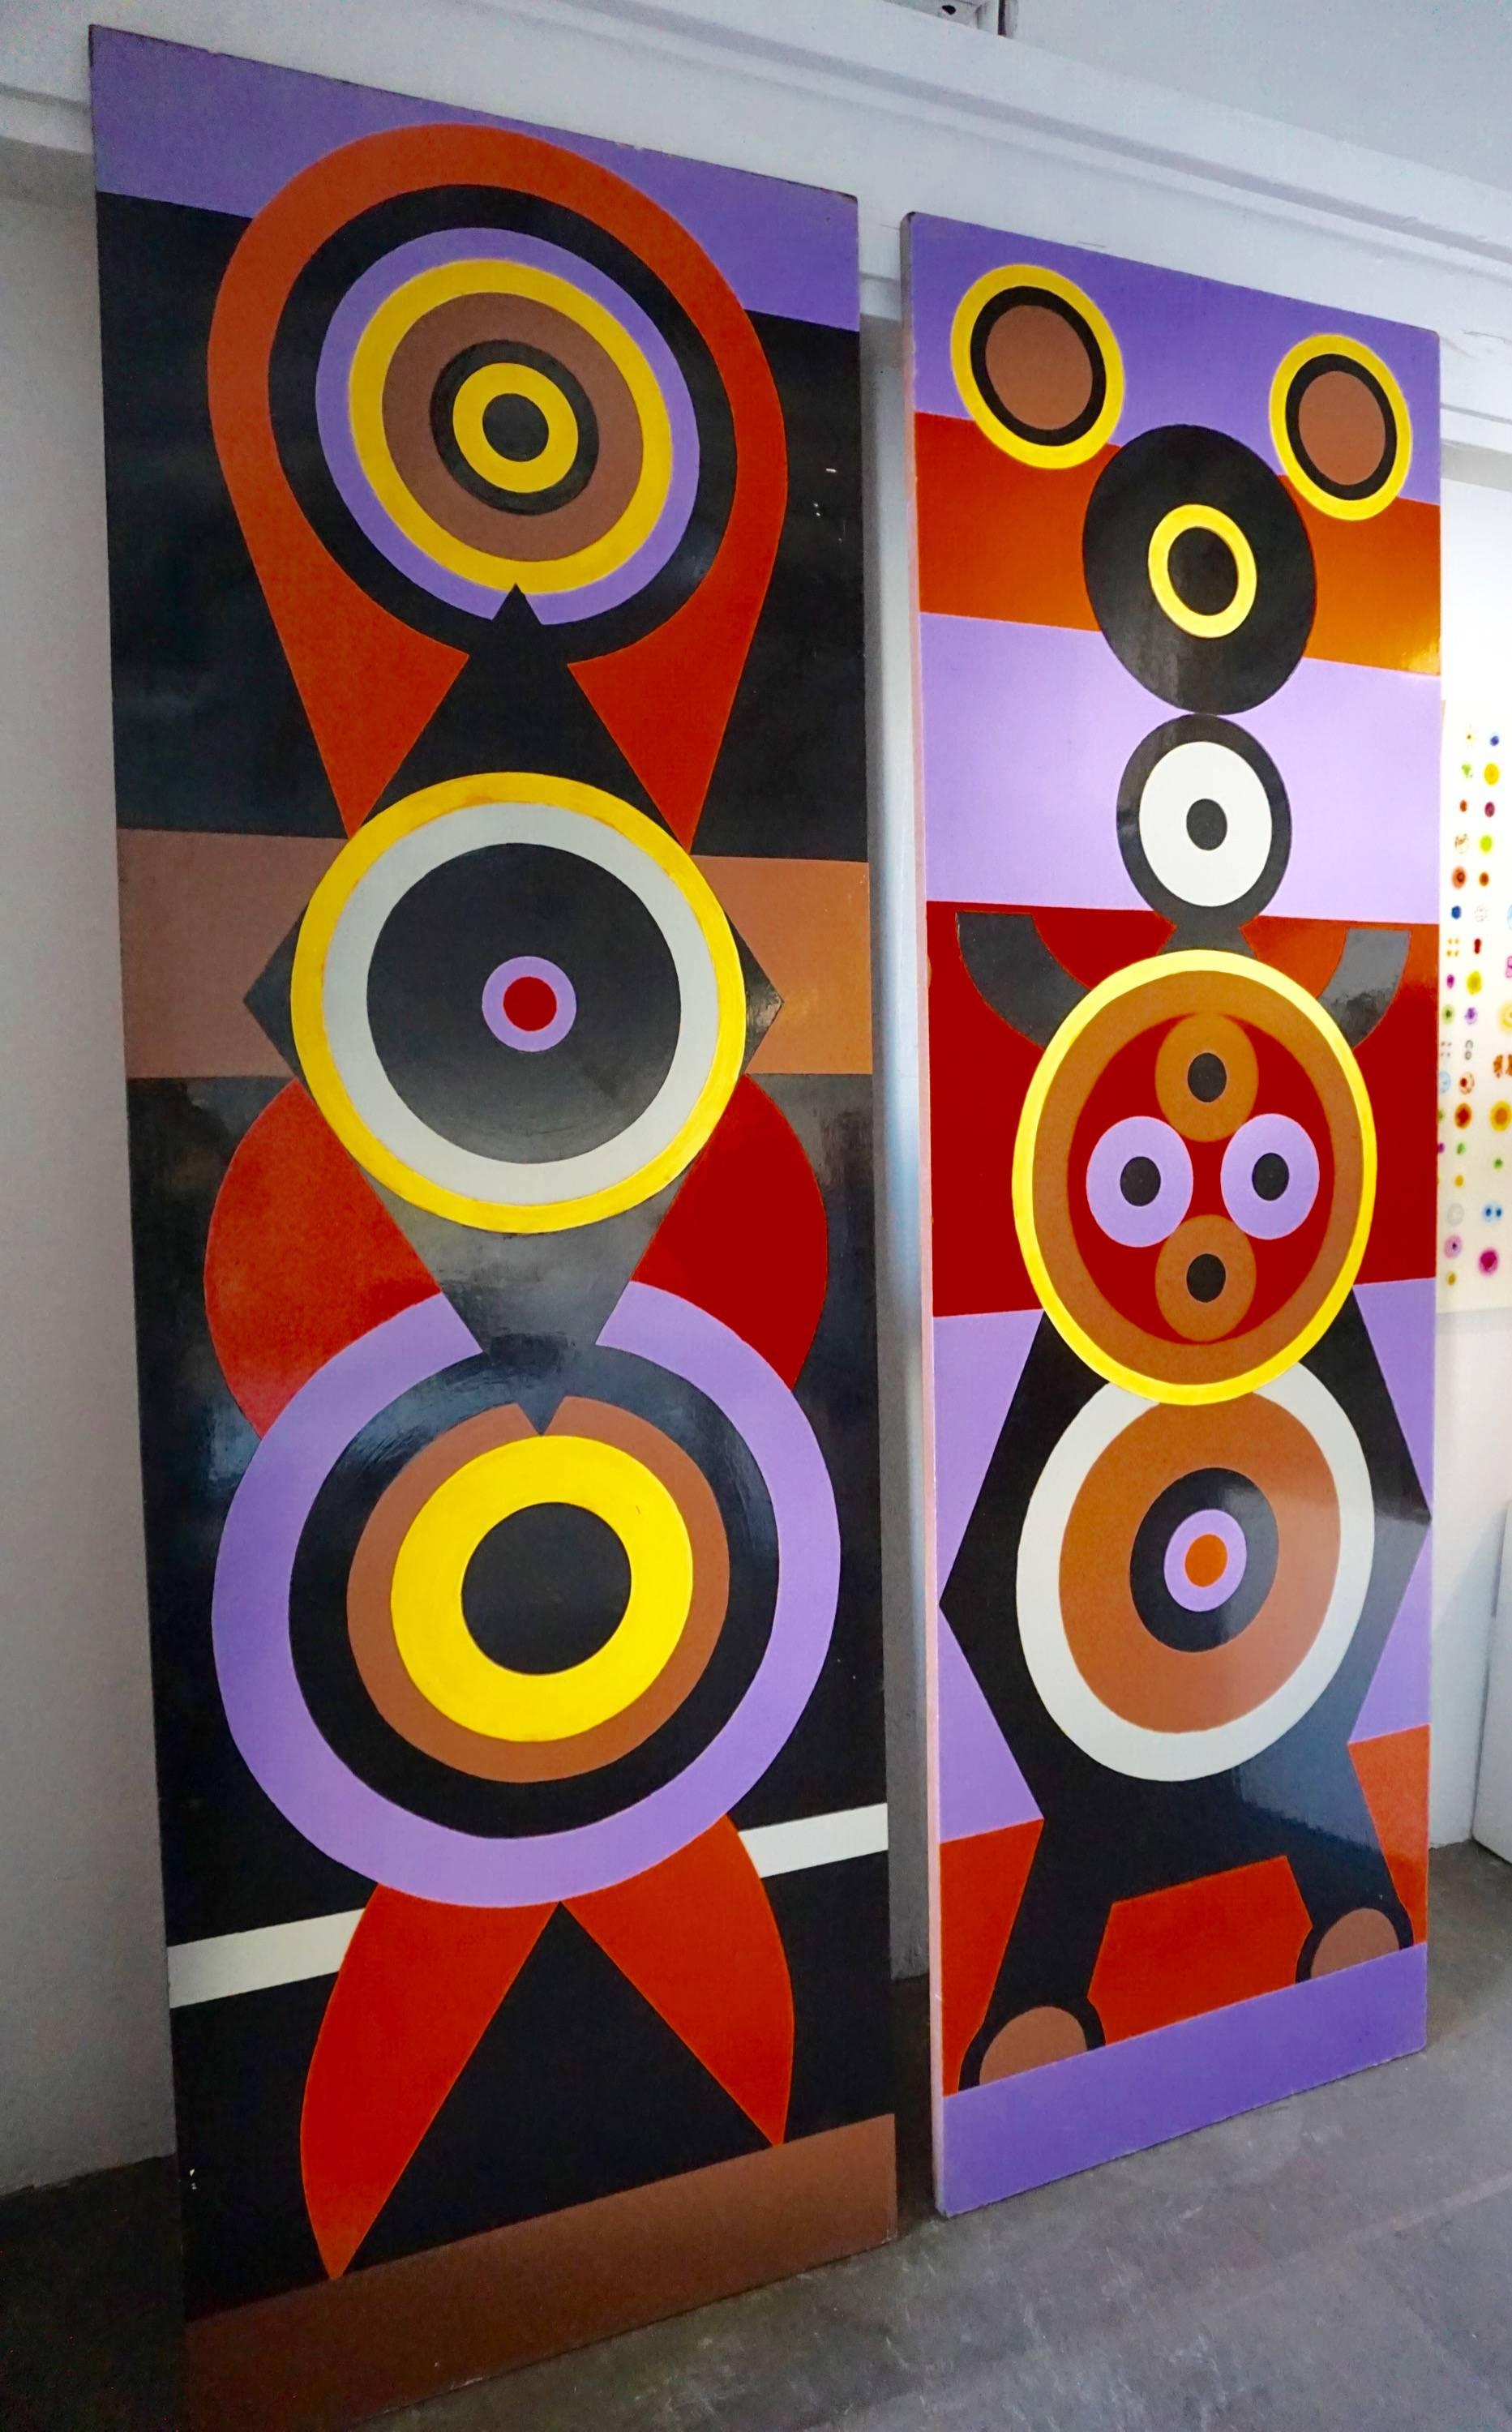 Vibrant and colorful examples of geometric artwork coming out of the Pop Art movement. Each measures 90" H x 30" W x 1" D. High gloss enamel on board and signed at the underside "Kisch TOTEM '1/70.